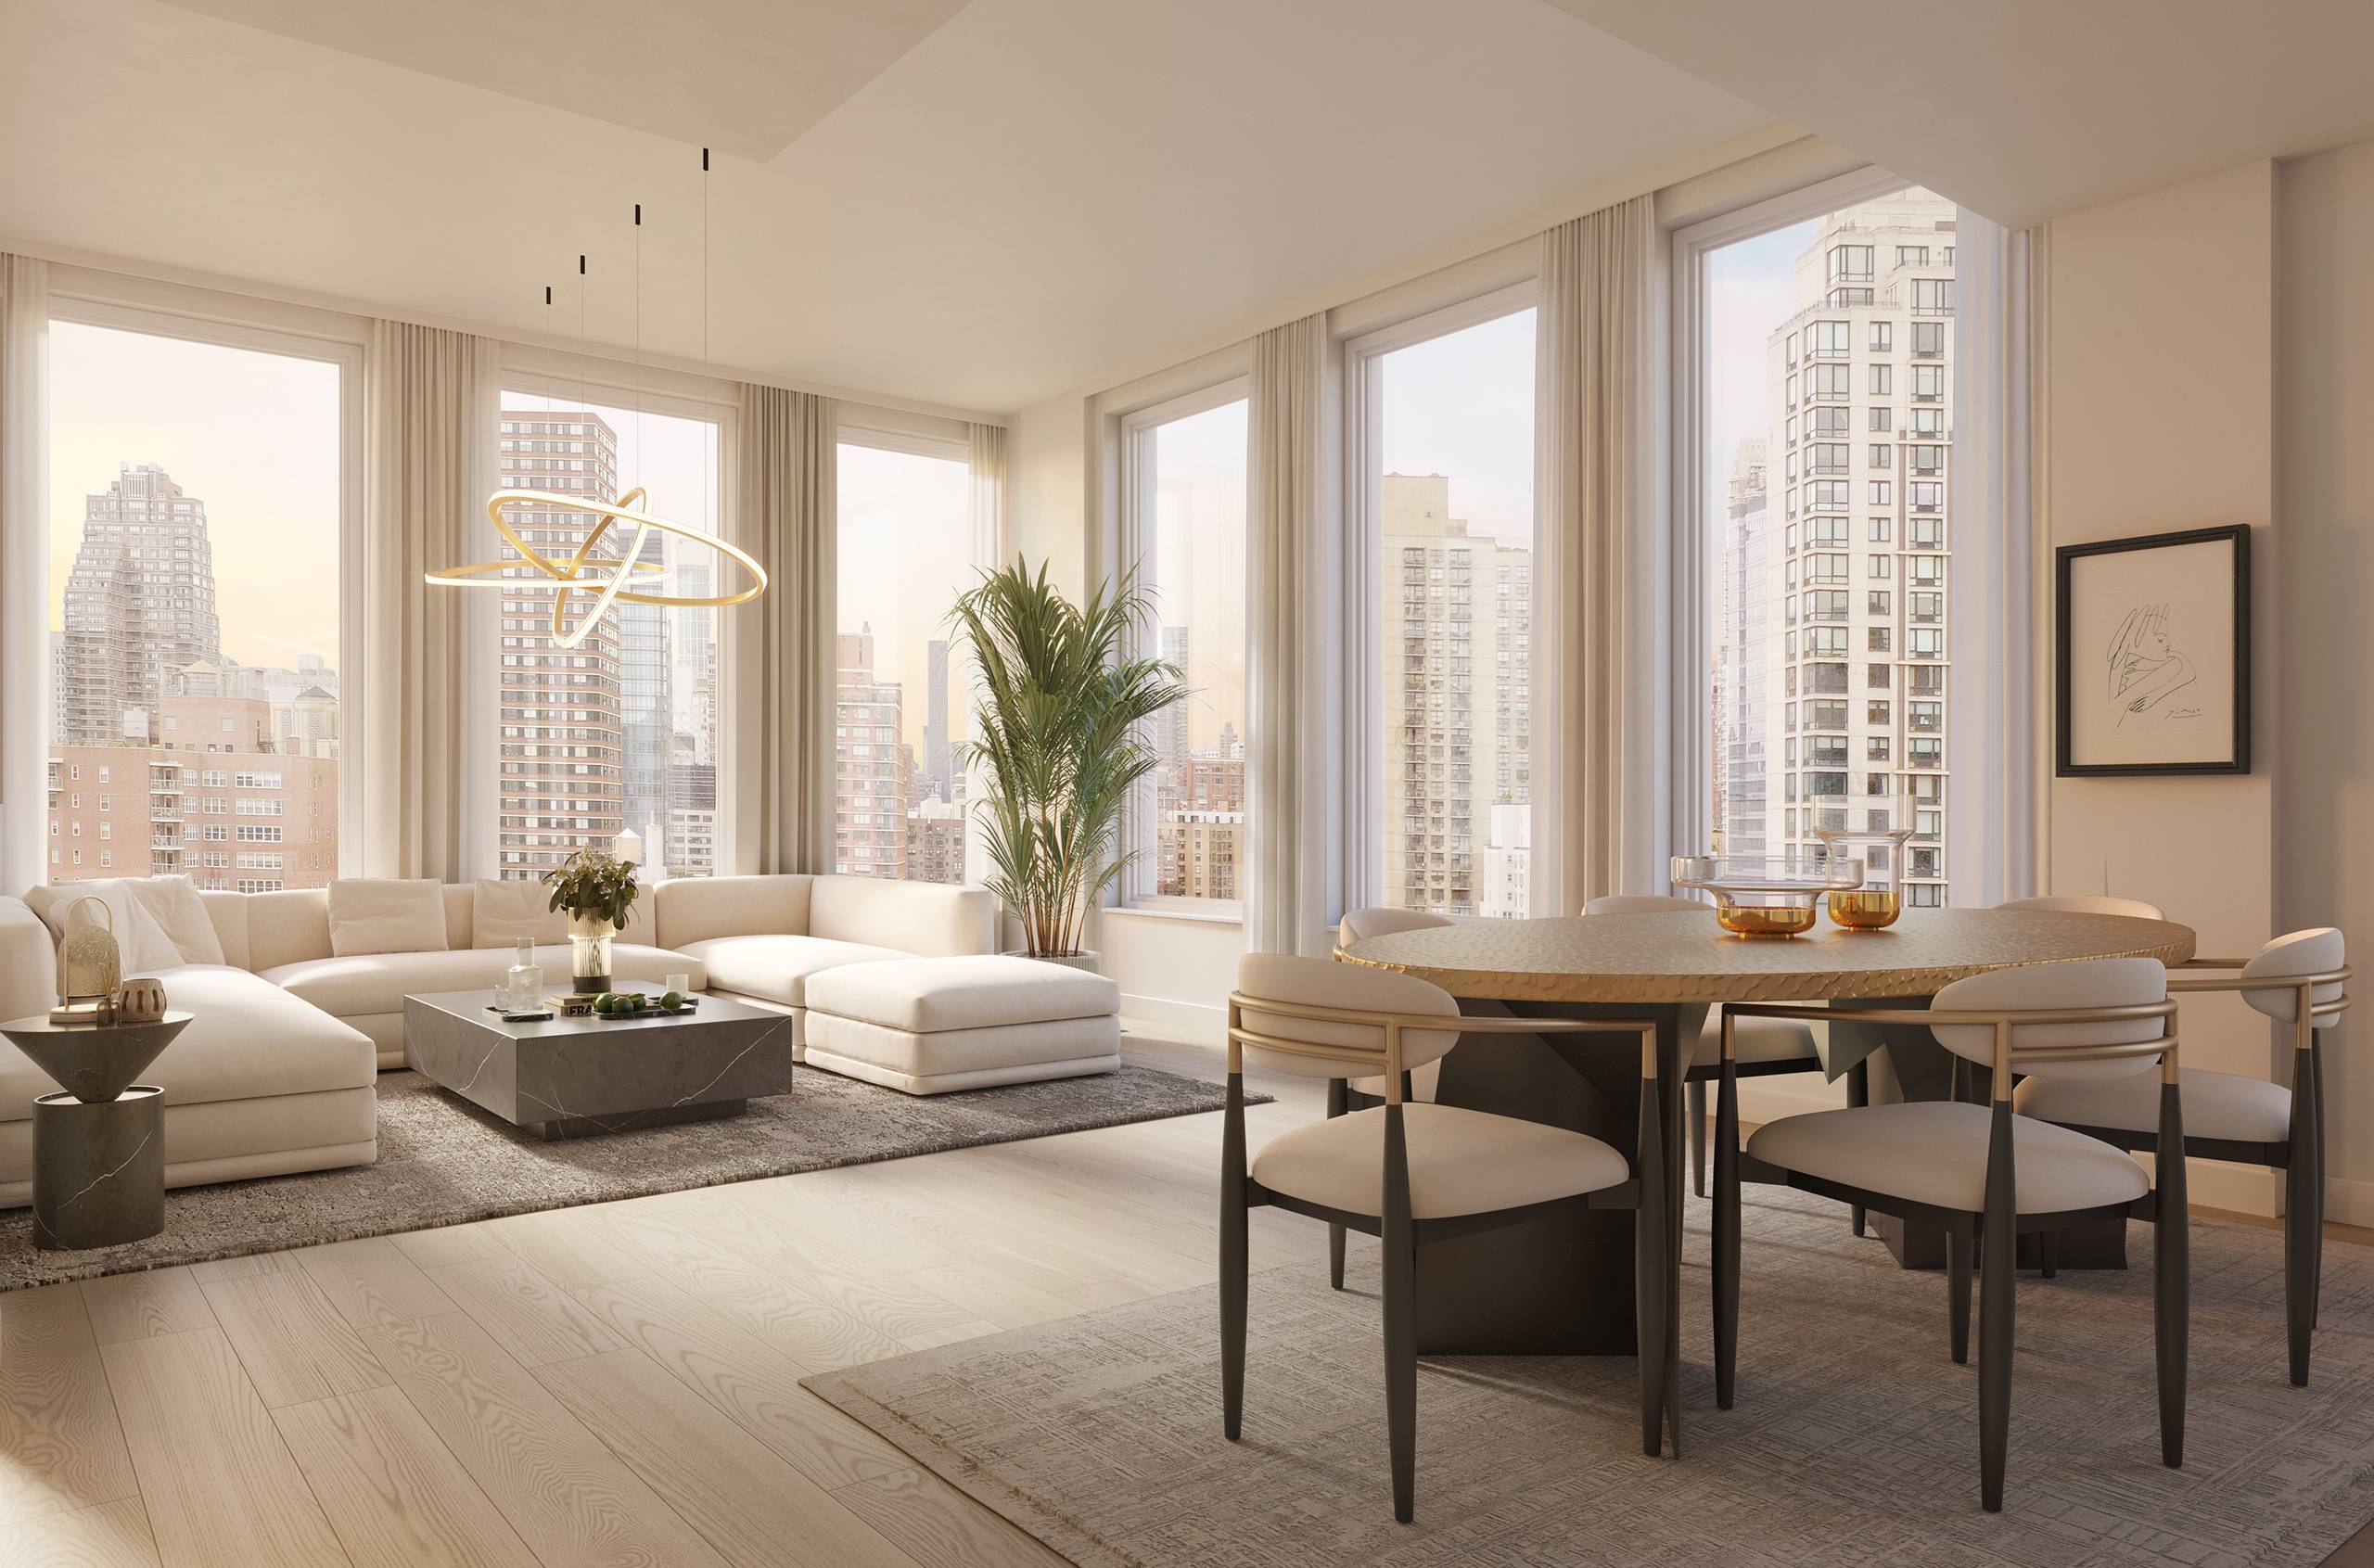 LUXURY NEW DEVELOPMENT CONDOMINIUM IN THE HEART OF THE UPPER EAST SIDE